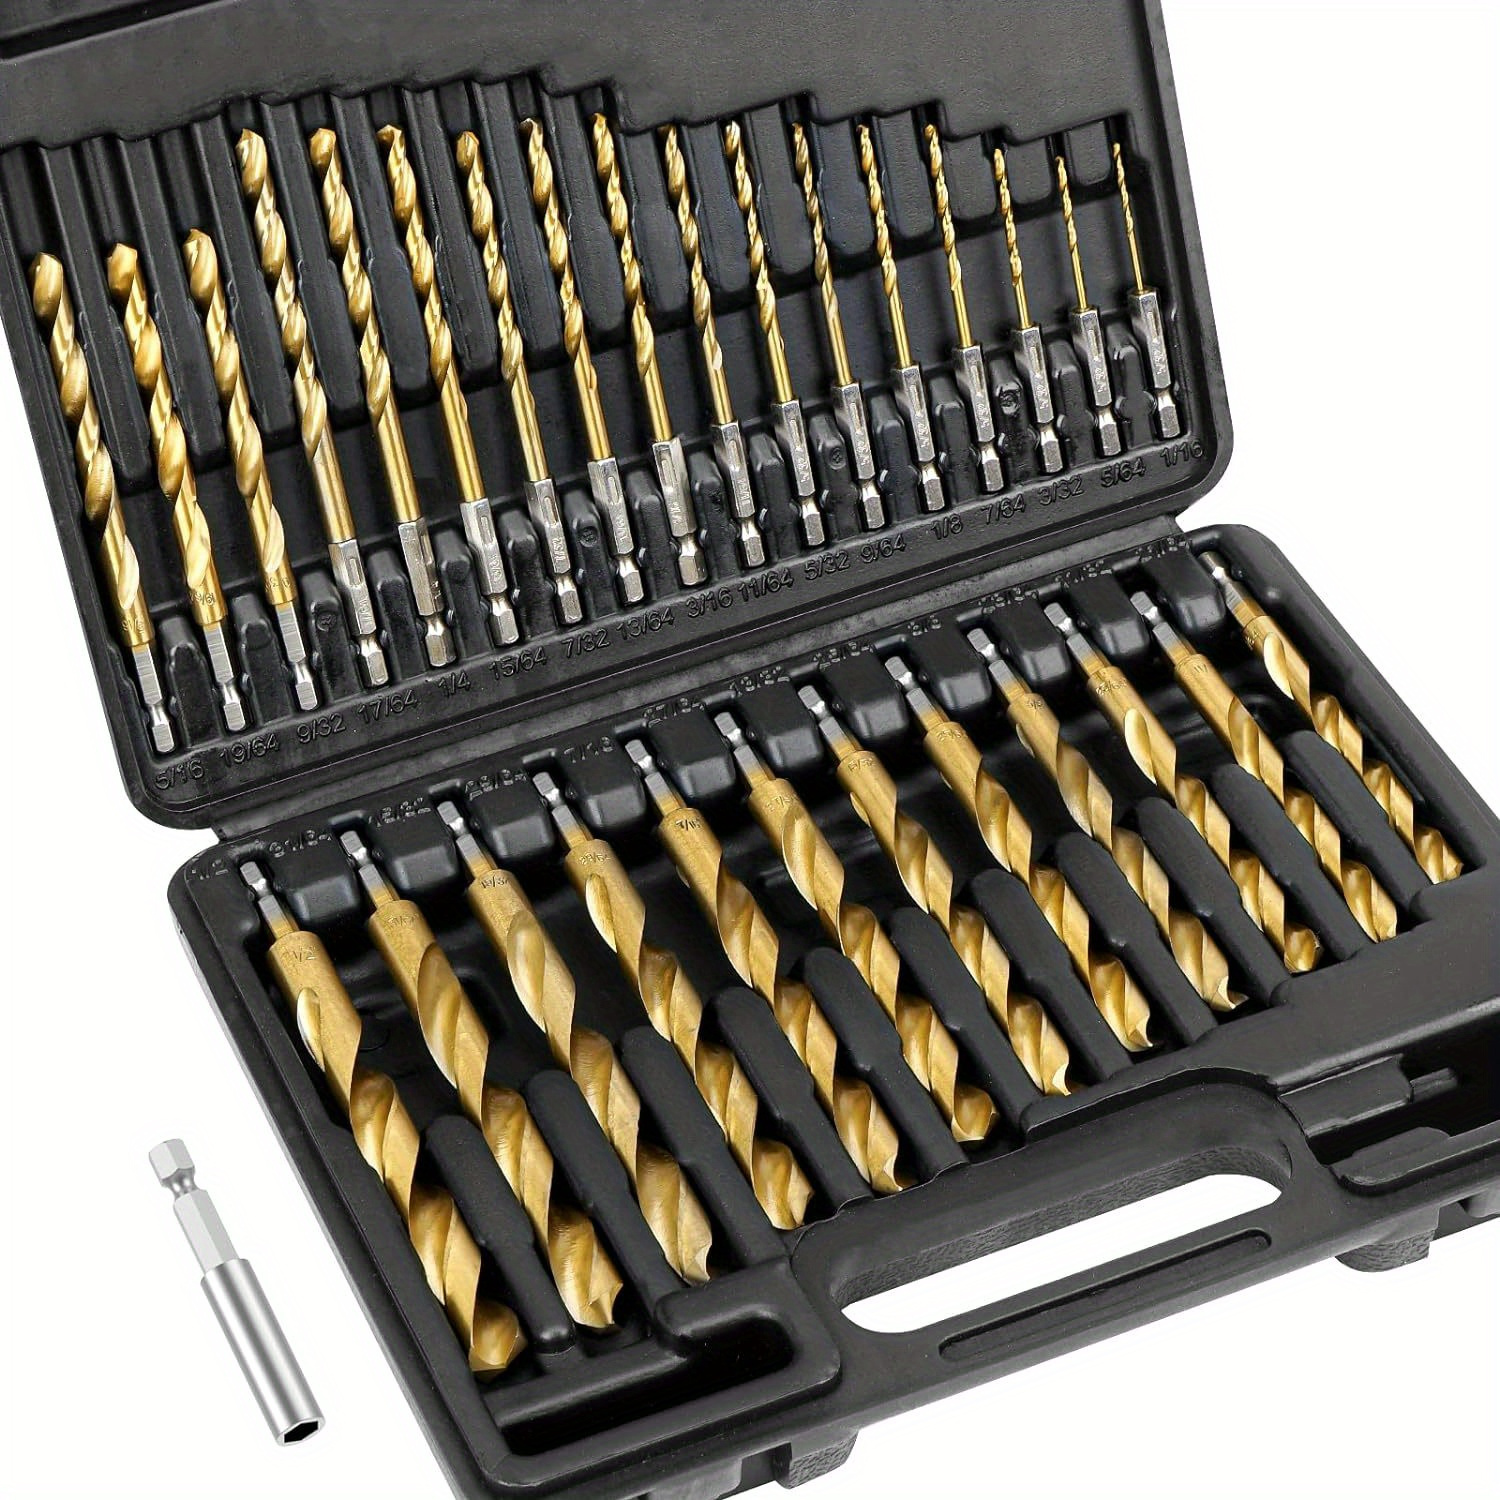 

13/30/50/90pcs Titanium Coated Drill Bit Set With Hex Shank - High Speed Steel Drill Bits Kit For Steel, Aluminum, Copper - Sizes 1/16"" To 1/2"" - Includes Storage Case